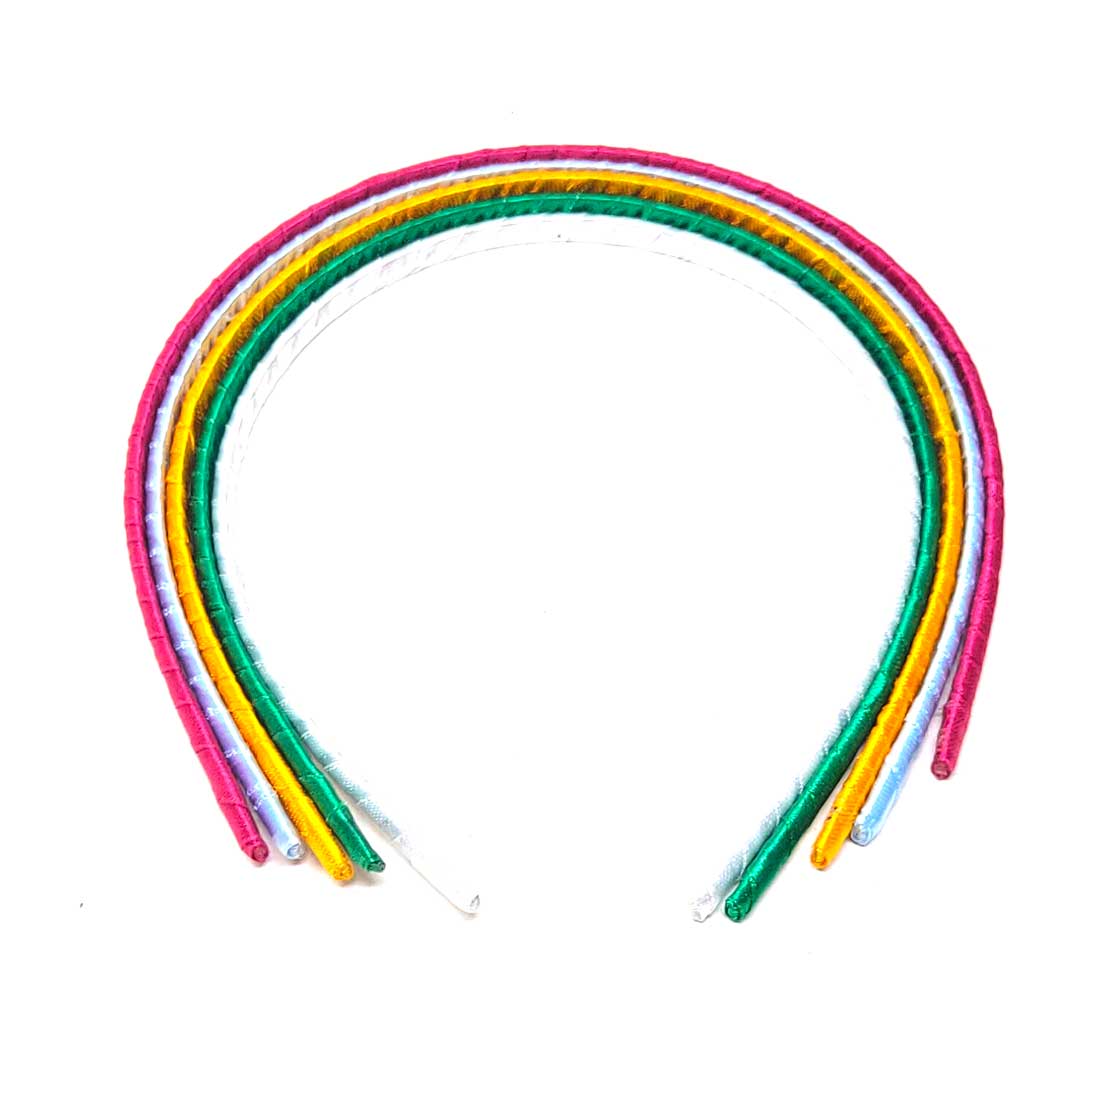 Anokhi Ada Ribbon on Plastic Hairbands / Headbands for Kids and Girls (Multi-Colour, Pack of 5) - 09-06H